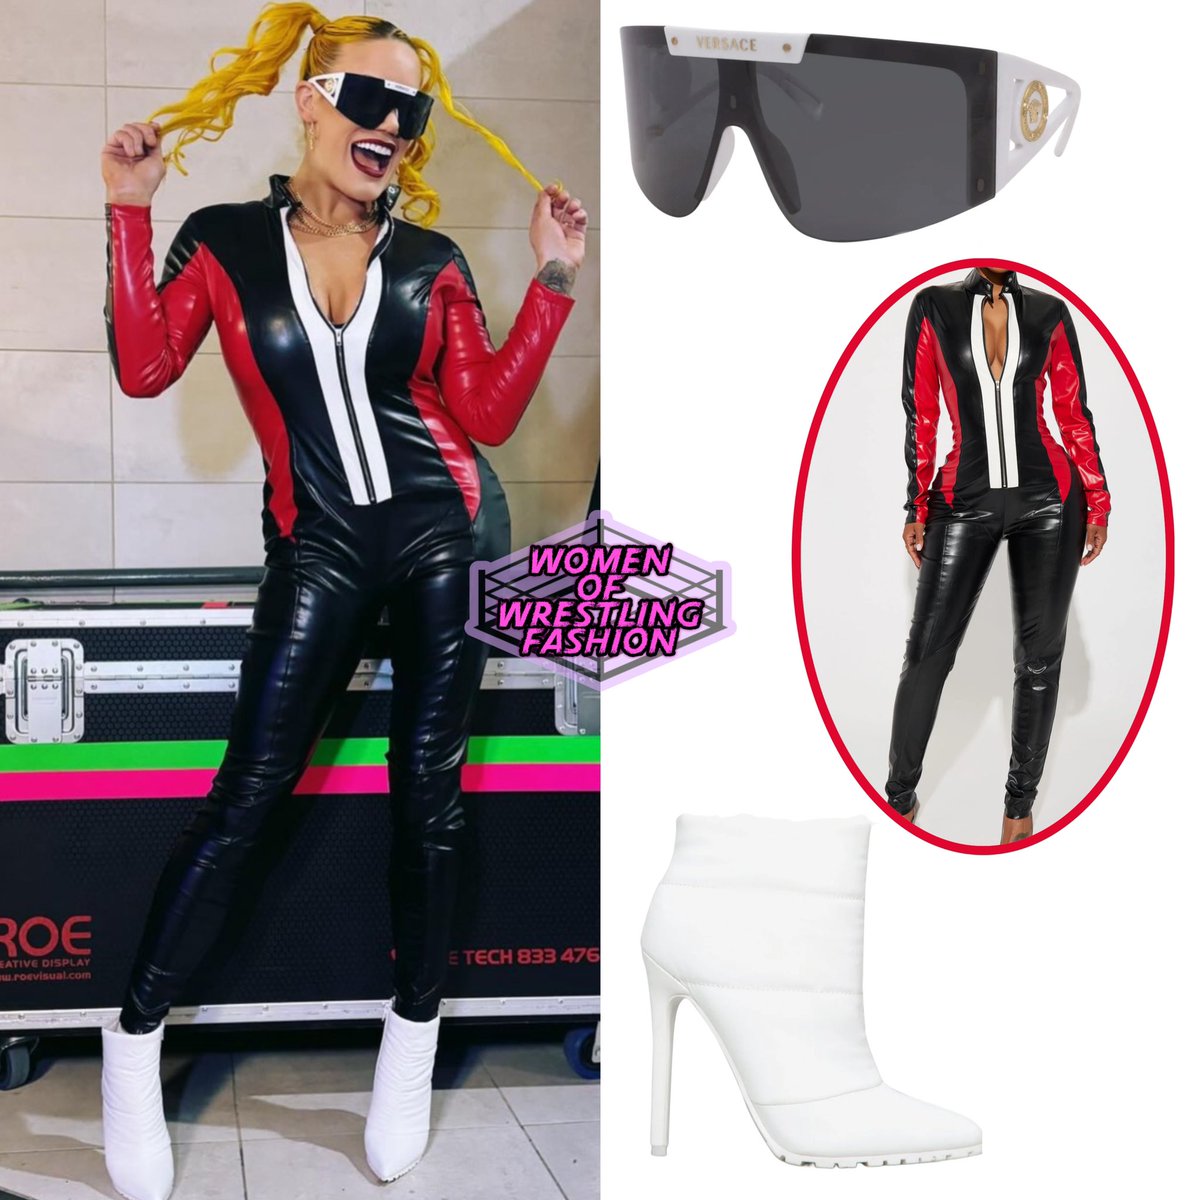 .@thetayavalkyrie wears the VE4393 Shade Sunglasses in White from @Versace (n/a), Moto Mami Faux Leather Jumpsuit from @FashionNova ($43.99 - on sale) & Kyli Puffer Bootie from @ShoeDazzle ($62.95 - sold out)